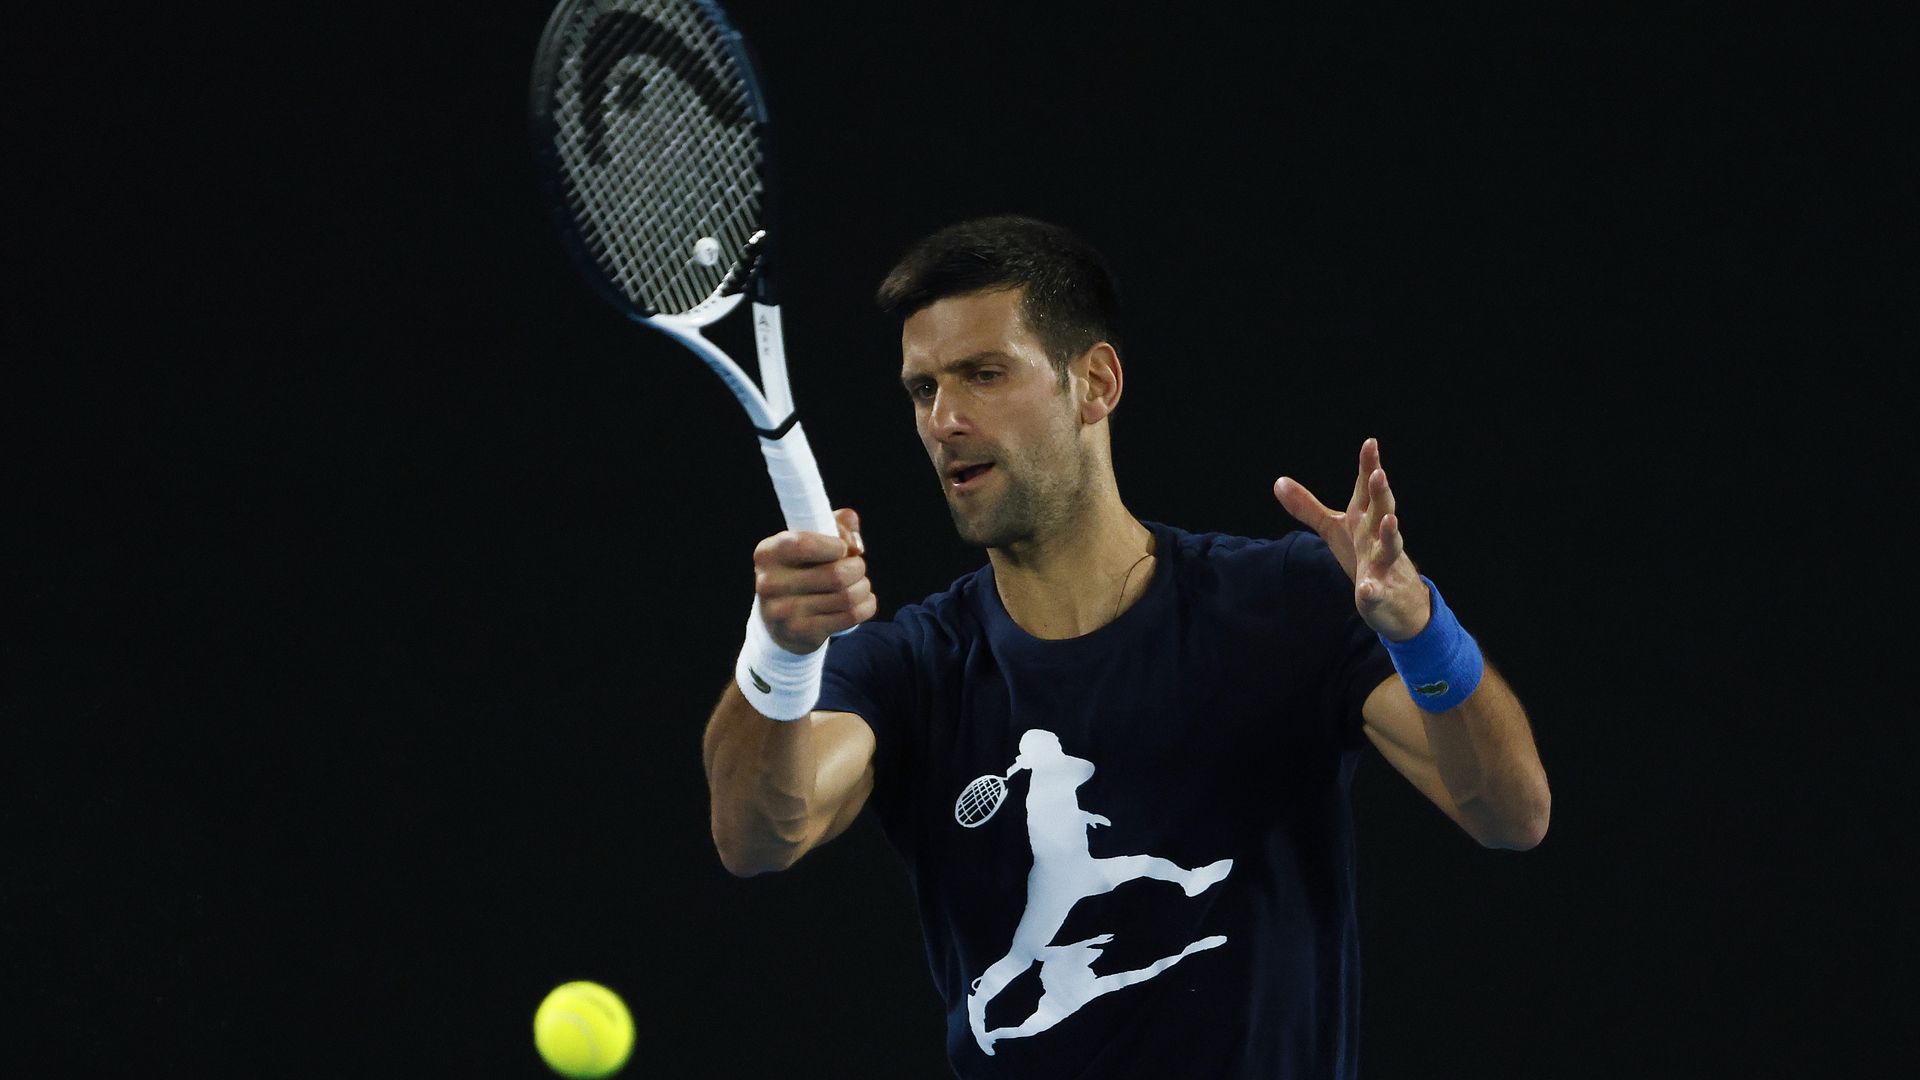 Novak Djokovic of Serbia plays a forehand during a practice session ahead of the 2022 Australian Open at Melbourne Park on January 14, 2022